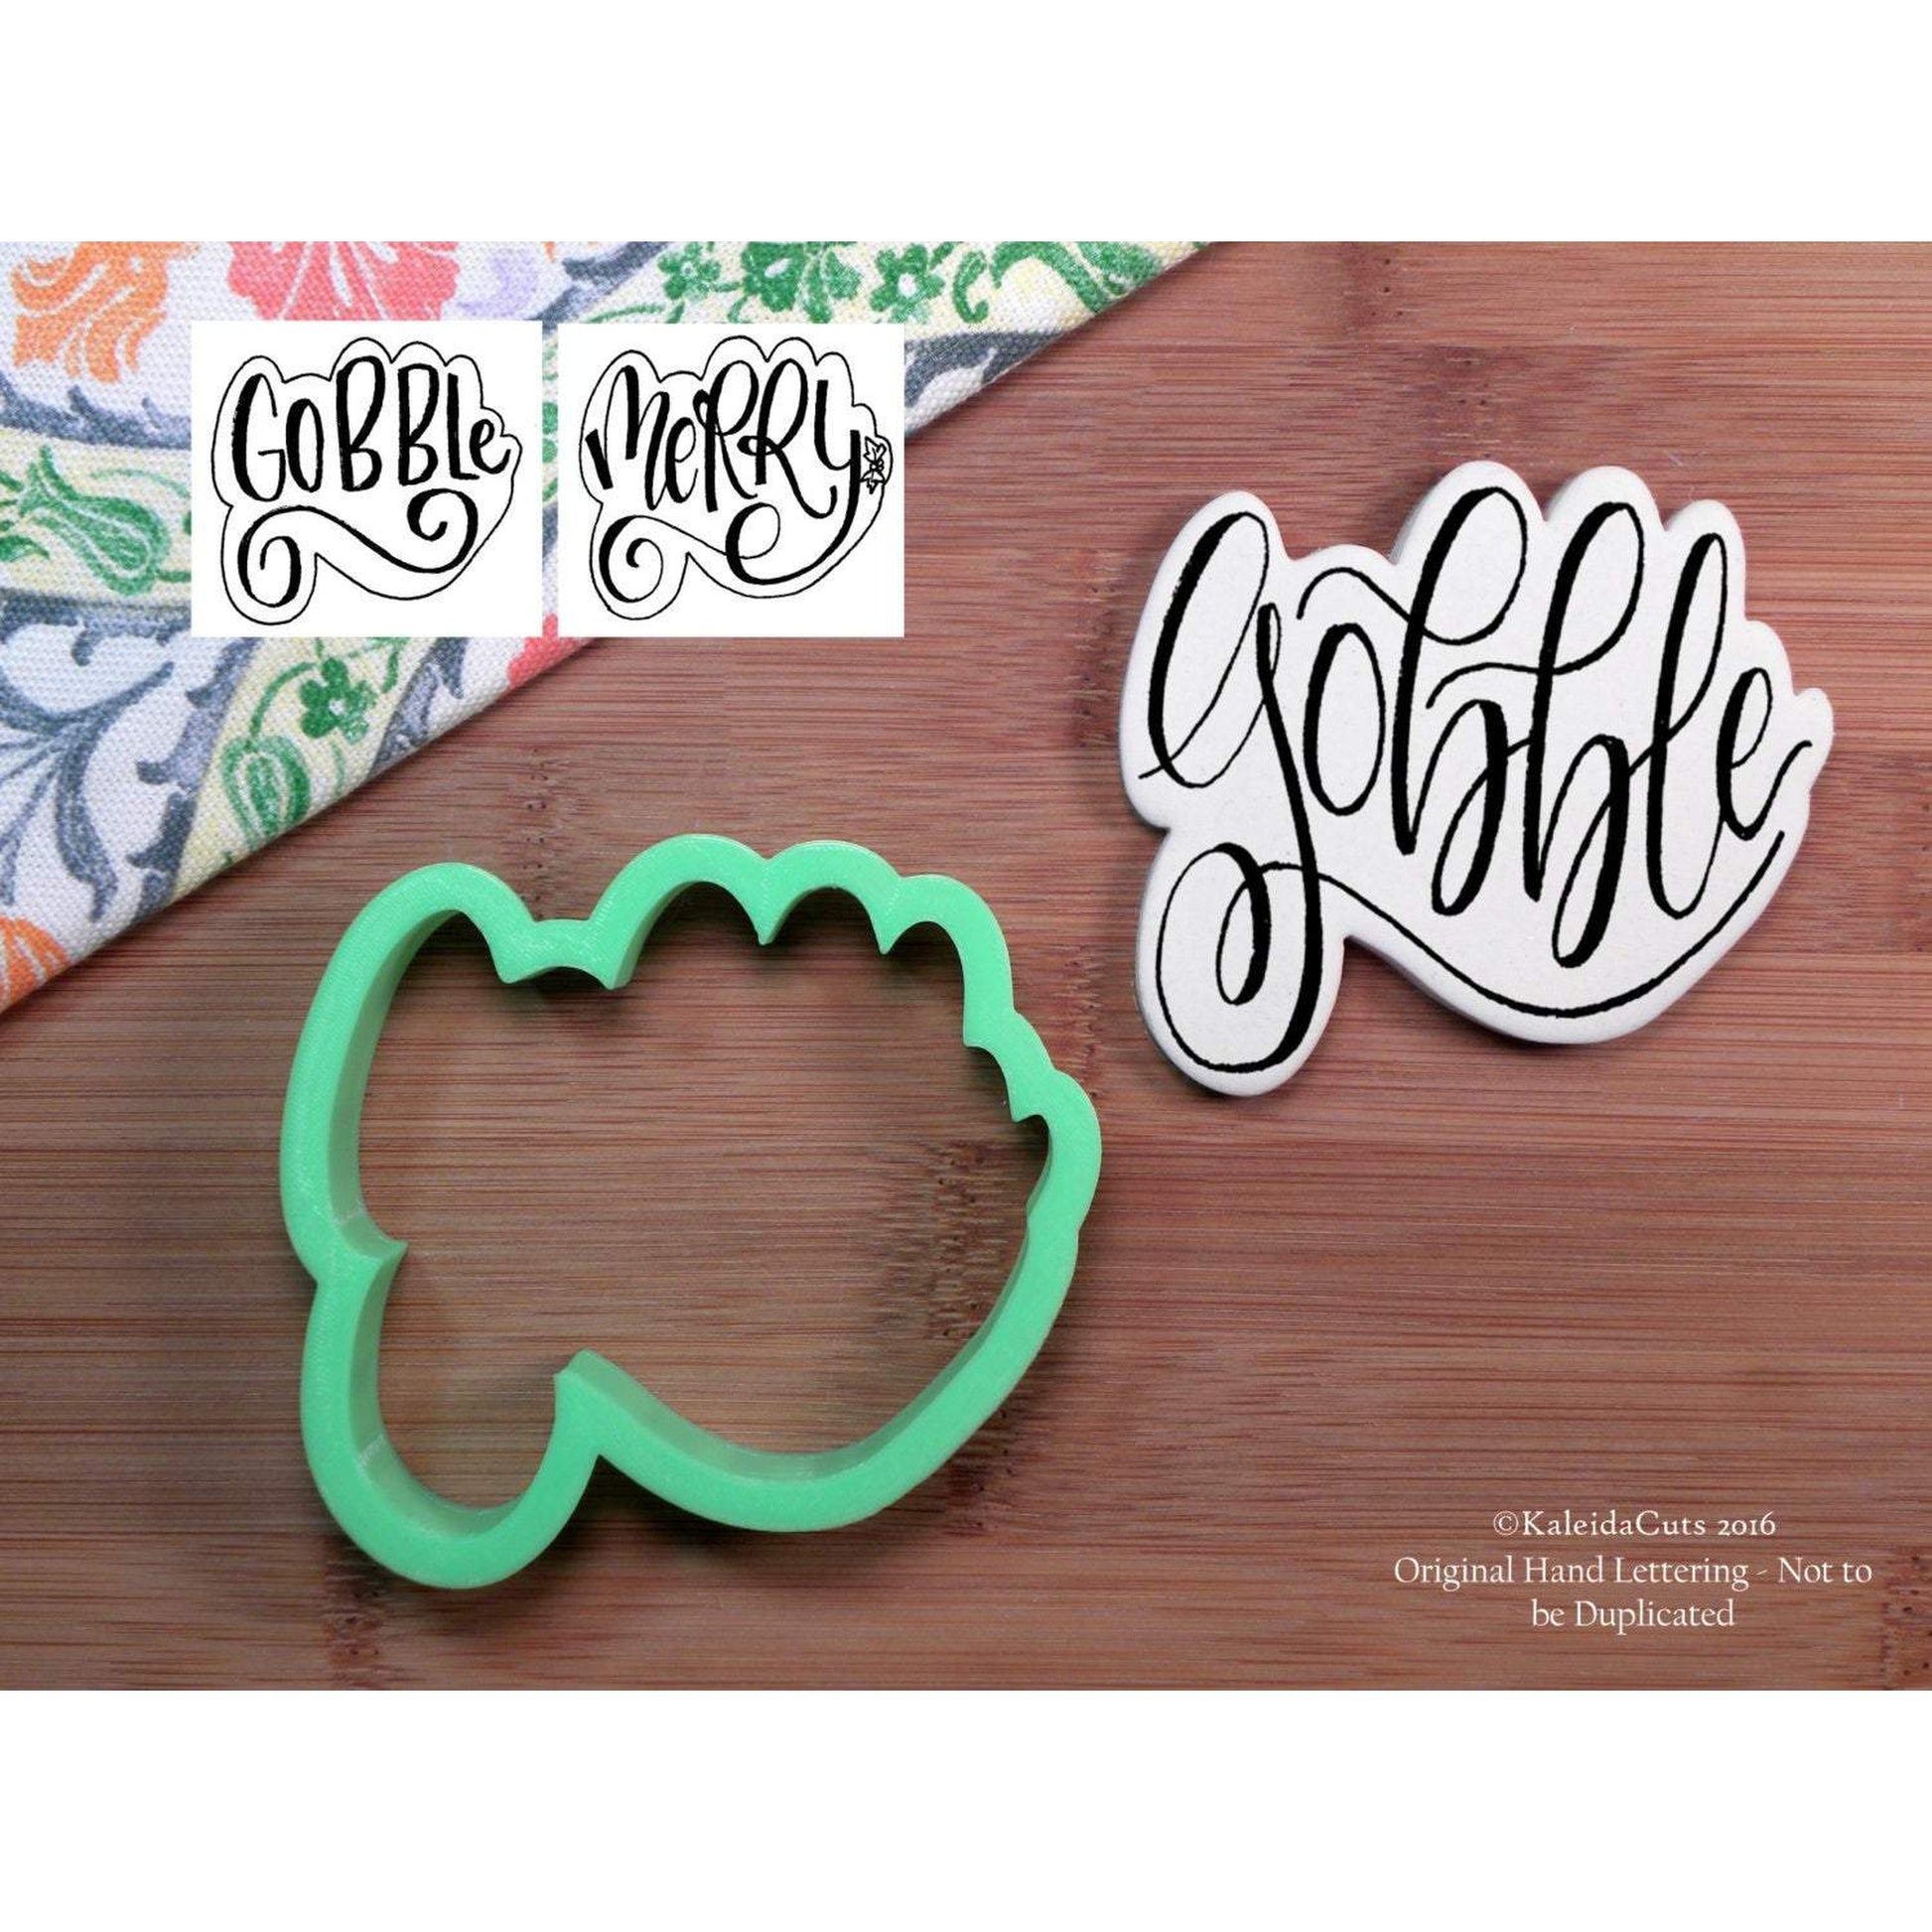 Gobble 1 Cookie Cutter